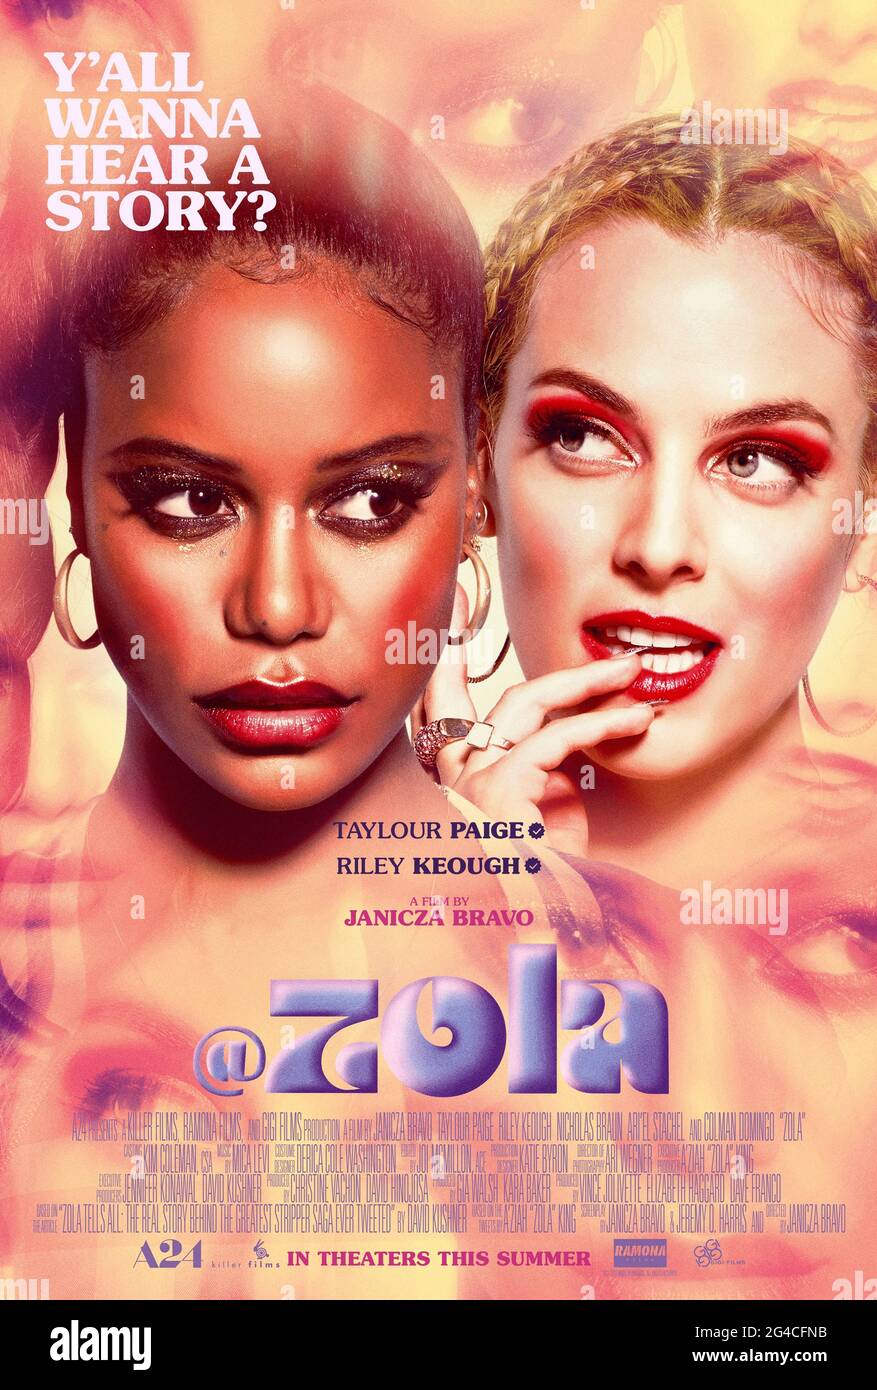 Zola (2020) directed by Janicza Bravo and starring Taylour Paige, Riley Keough and Colman Domingo. A stripper named Zola embarks on a wild road trip to Florida inspired by Detroit waitress A'Ziah 'Zola' King's popular Twitter feed. Stock Photo